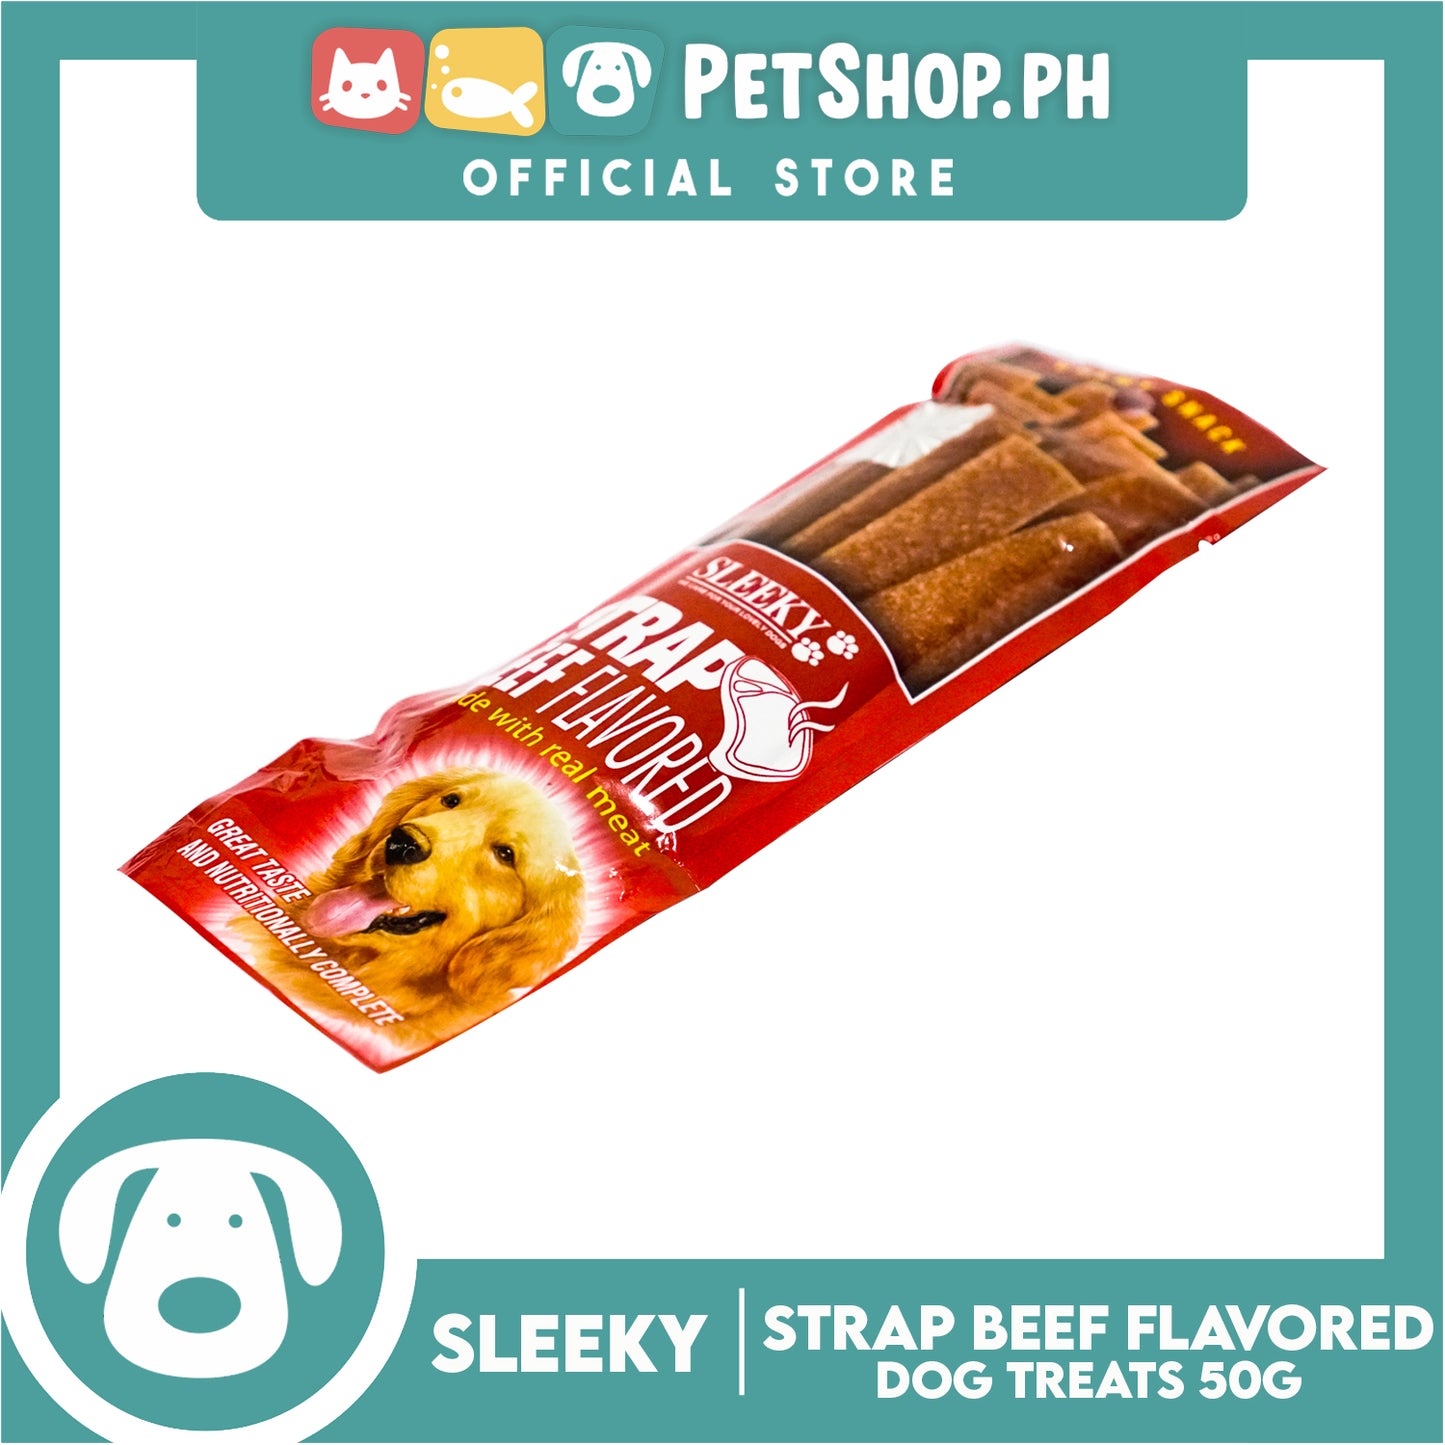 Sleeky Chewy Strap Beef Flavored 50g Dog Treats